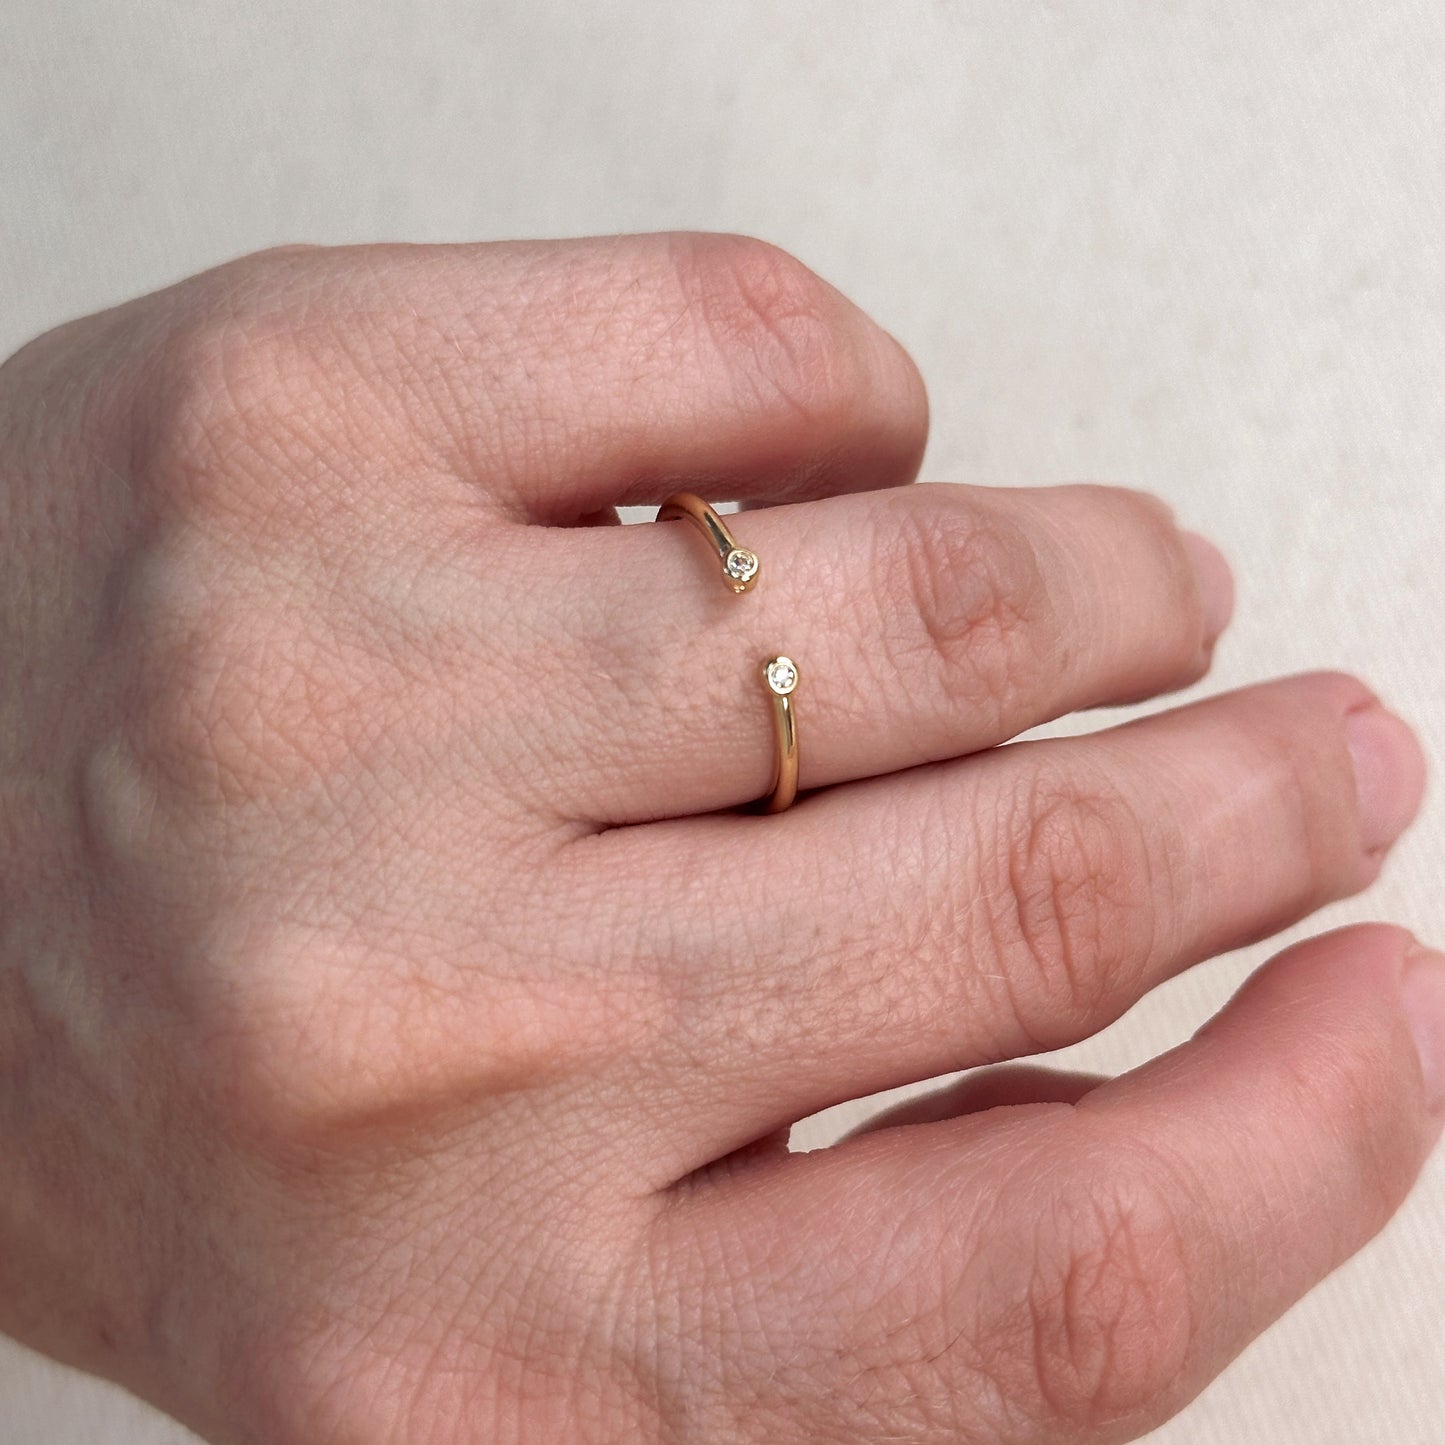 18k Gold Filled Dainty Open Ring with Micro Bezel Zirconia